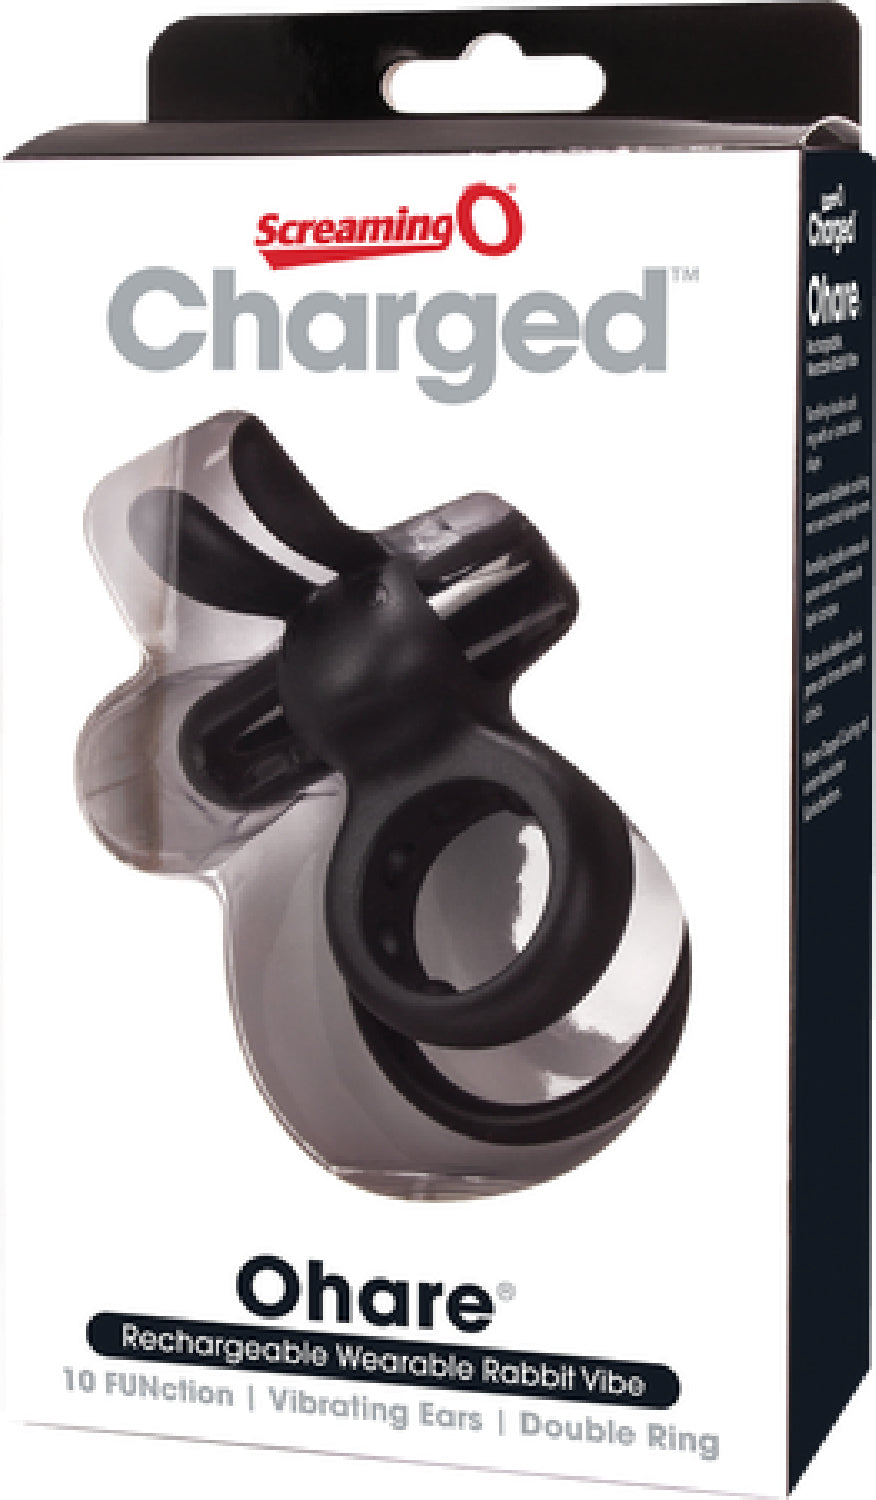 Charged - Ohare - Black